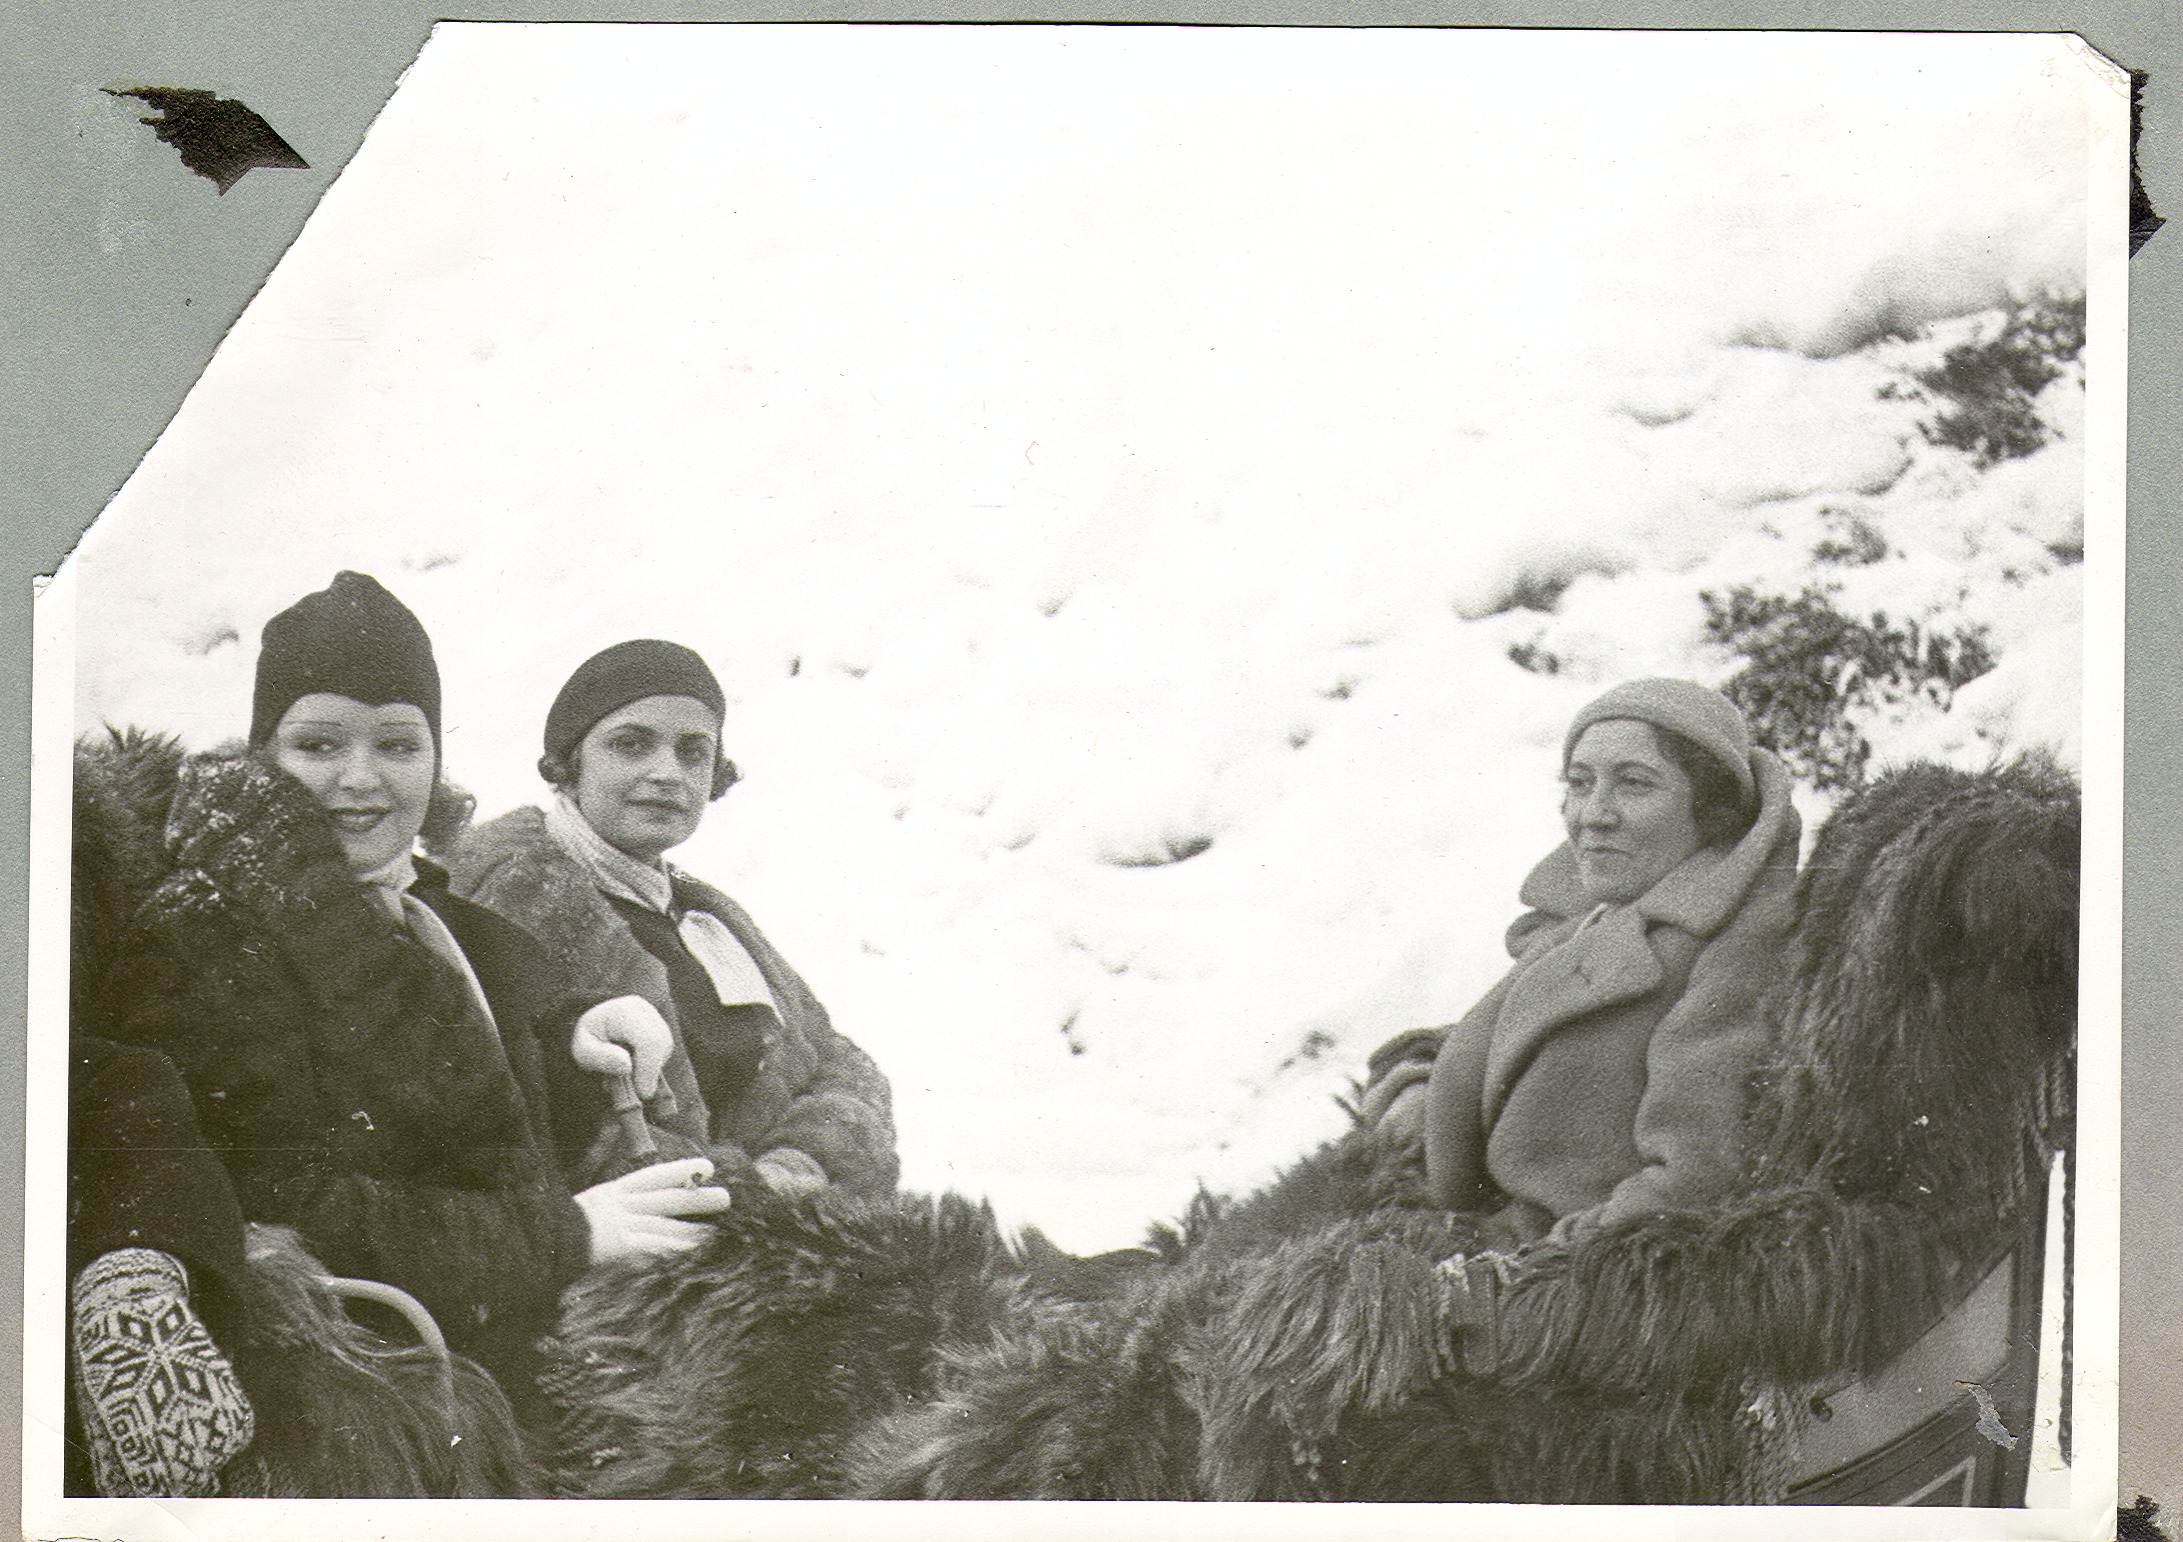 Clara Bow Bell in sleigh with two unidentified women during her honeymoon in Europe: photographic print